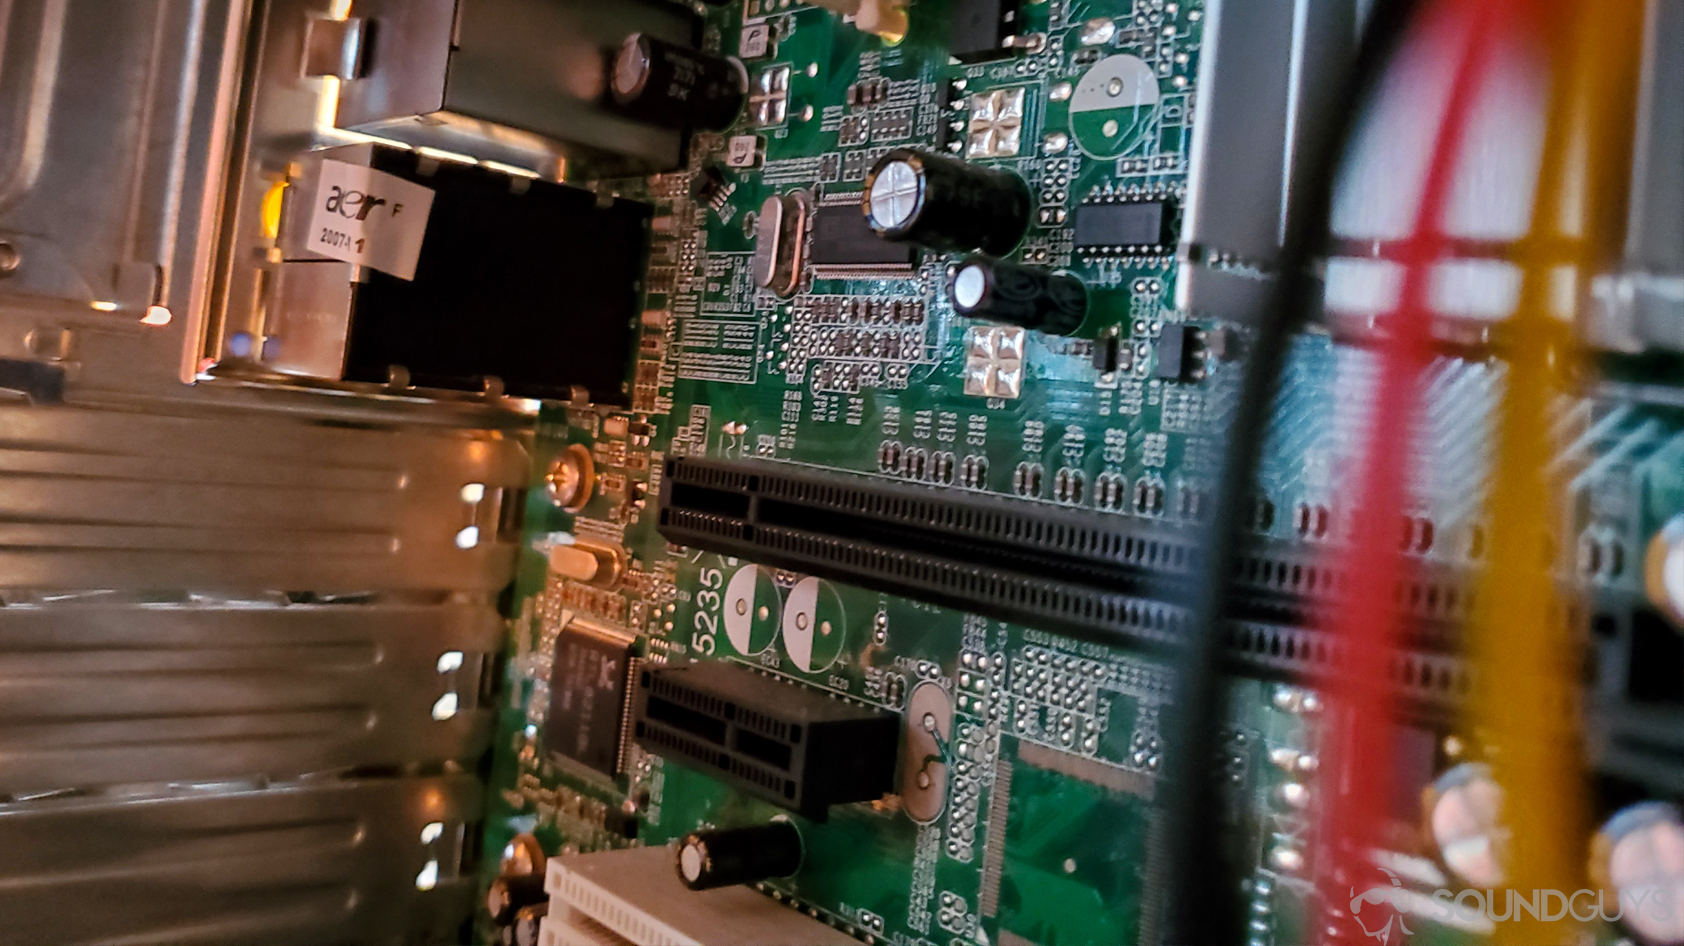 A photo of the inside of a computer, showing both the PCI and PCIe card slots for inserting sound card